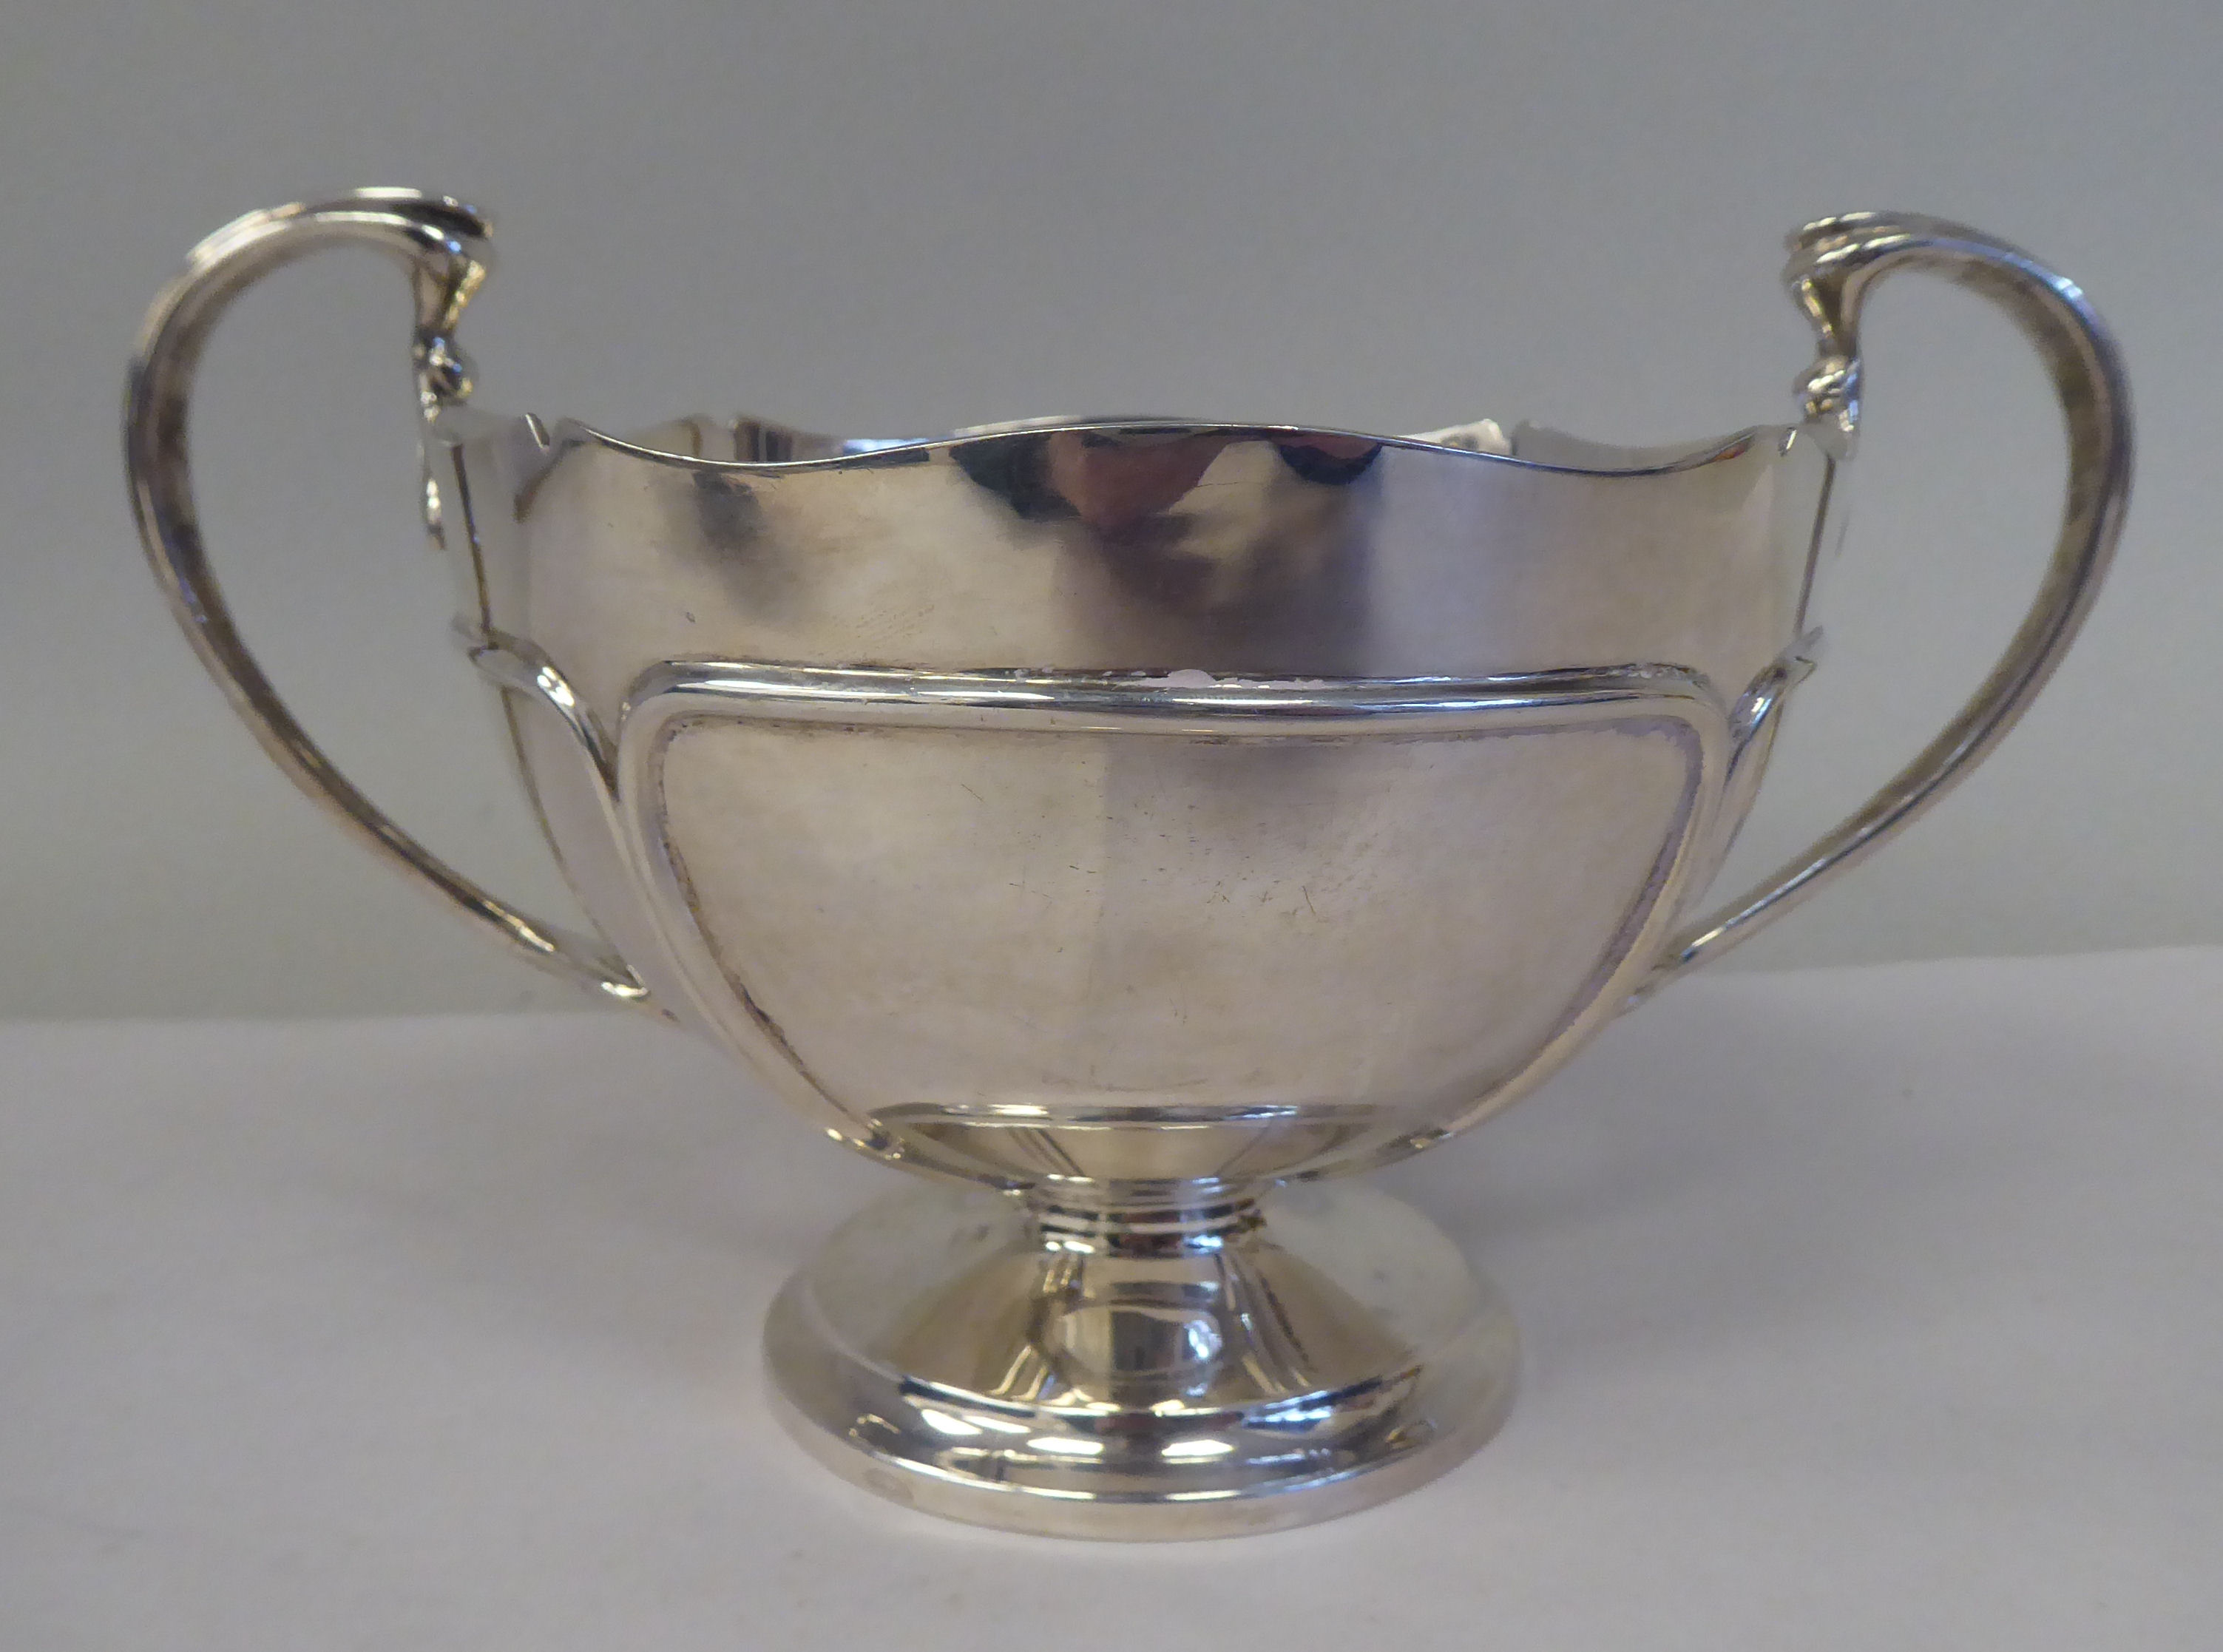 A four piece silver tea set, comprising a teapot of pedestal bowl display with an S-swept swept, - Image 8 of 12